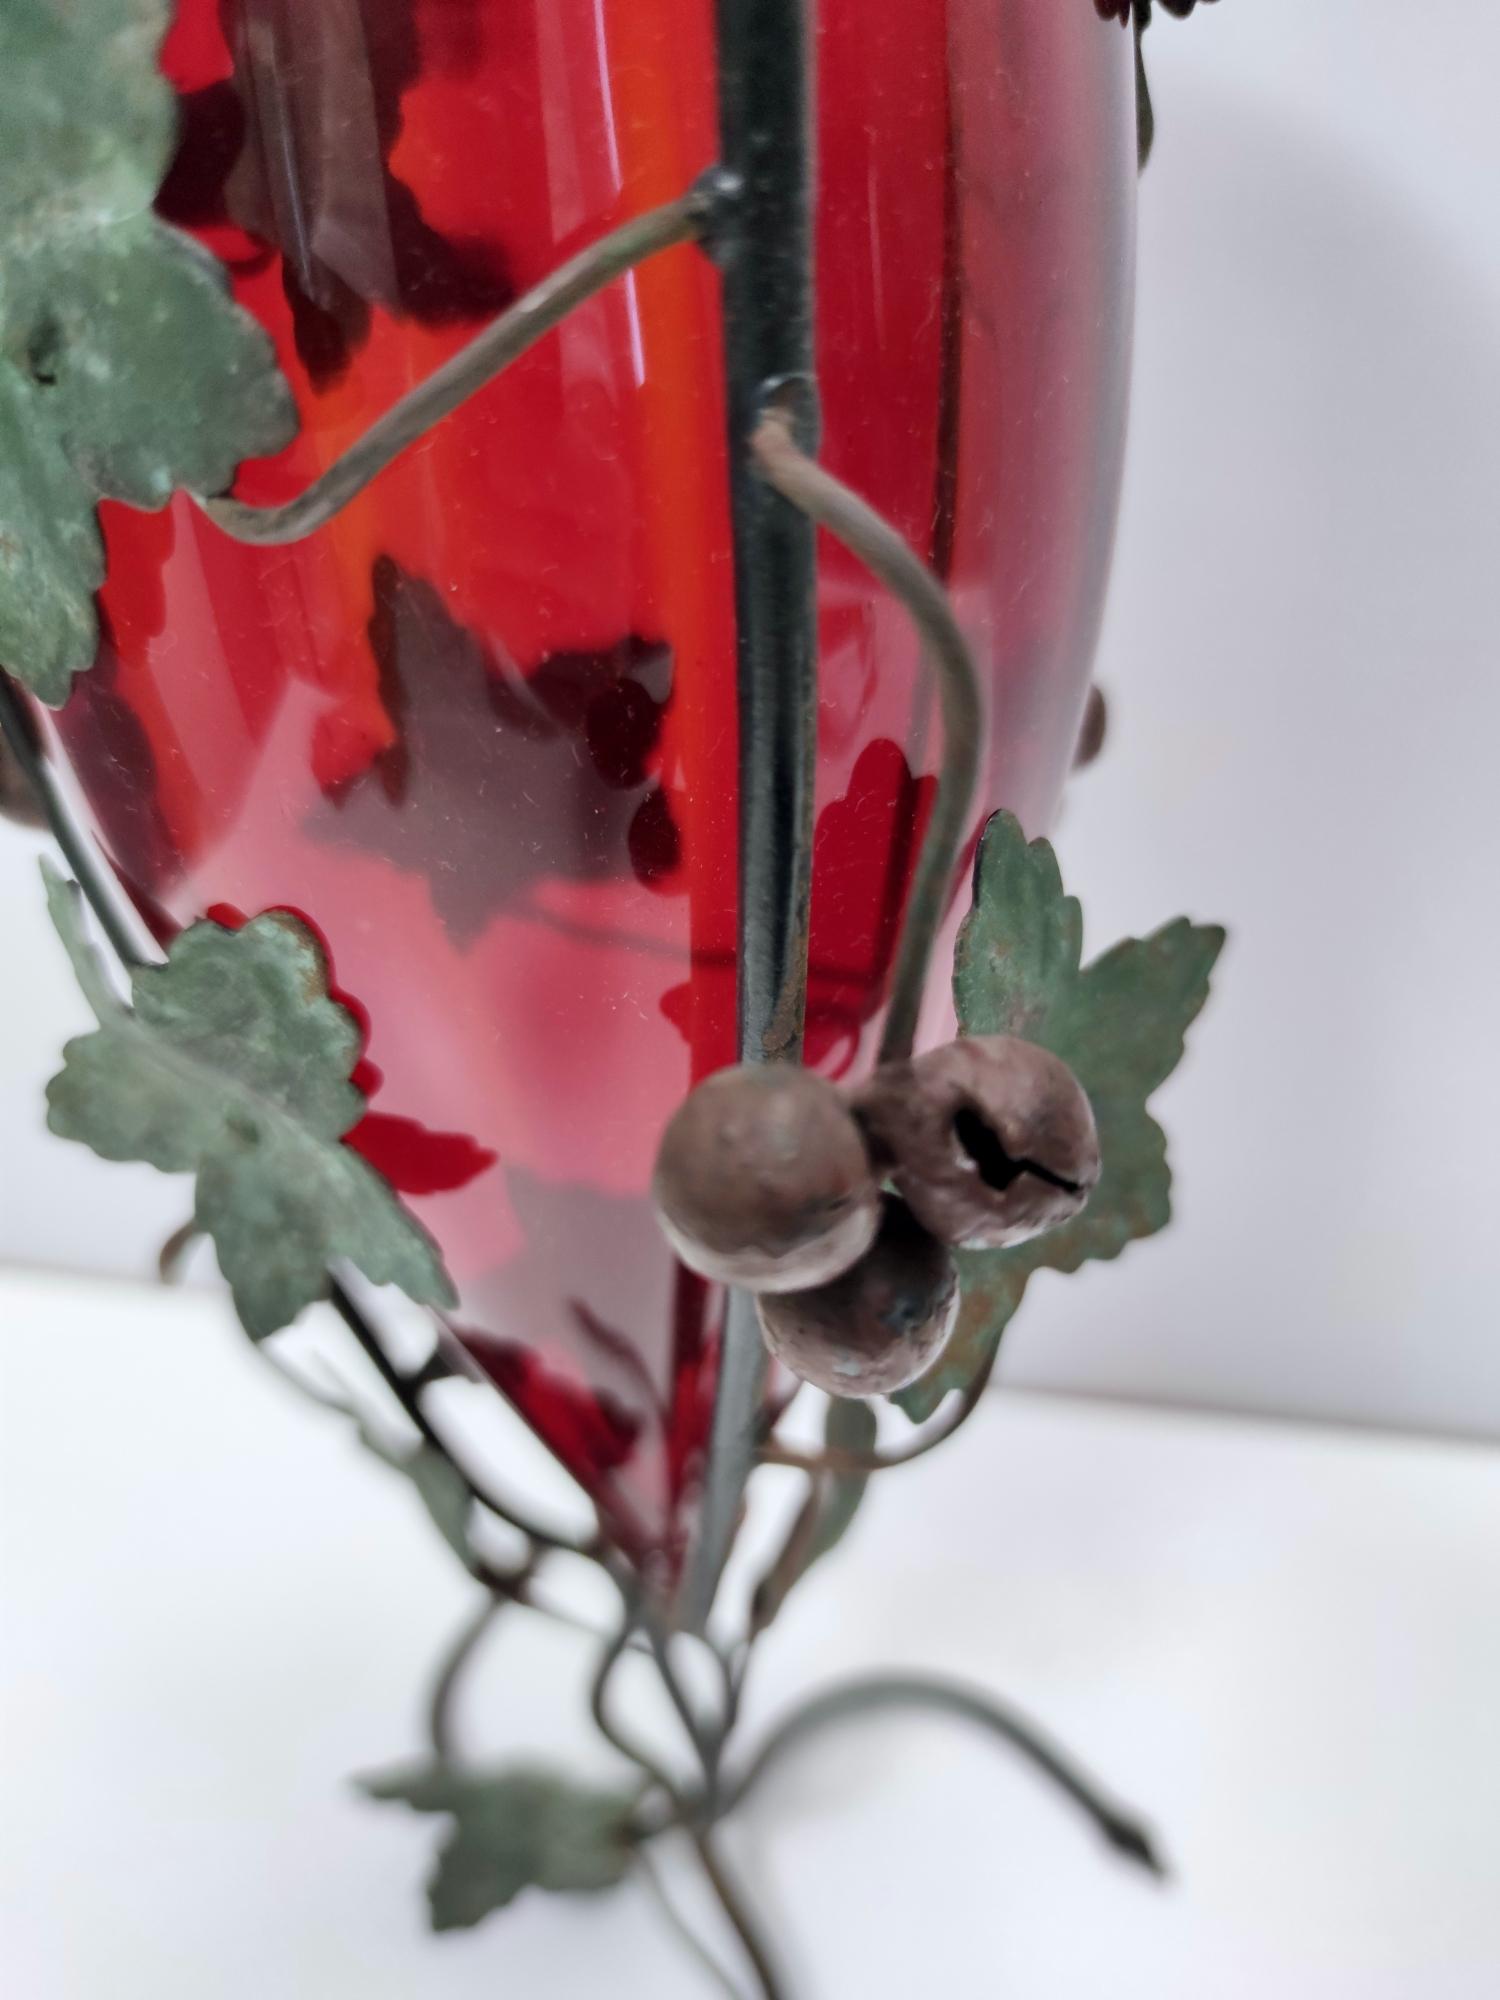 Mid-20th Century Ruby Red Murano Glass Vase with Iron Grape Vines Ascribable to Umberto Bellotto For Sale